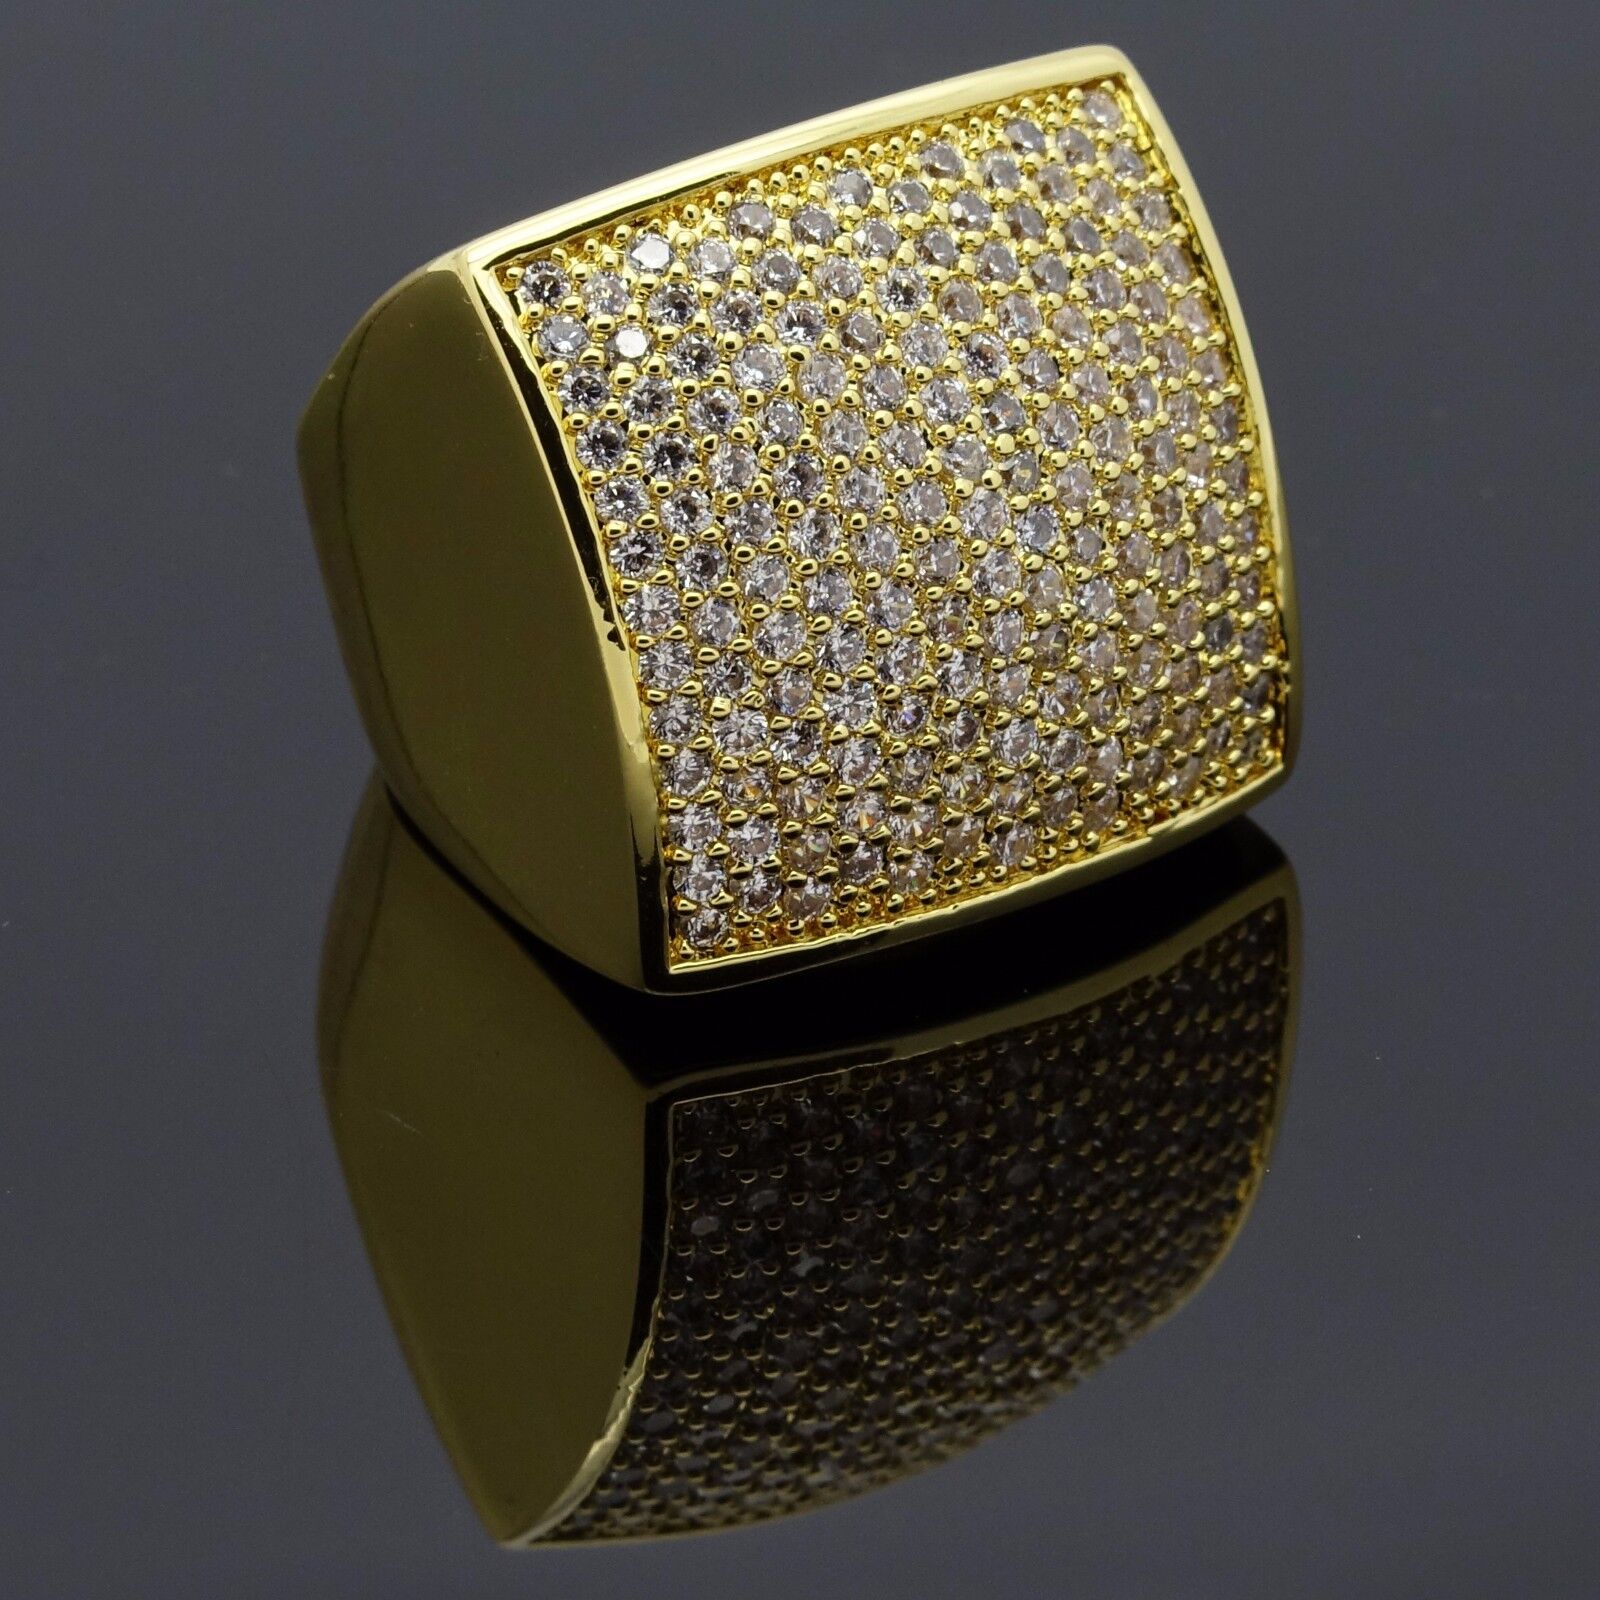 Huge 24MM Square Ring Gold Plated Micro Pave Cubic-Zirconia Men's Size 7-12